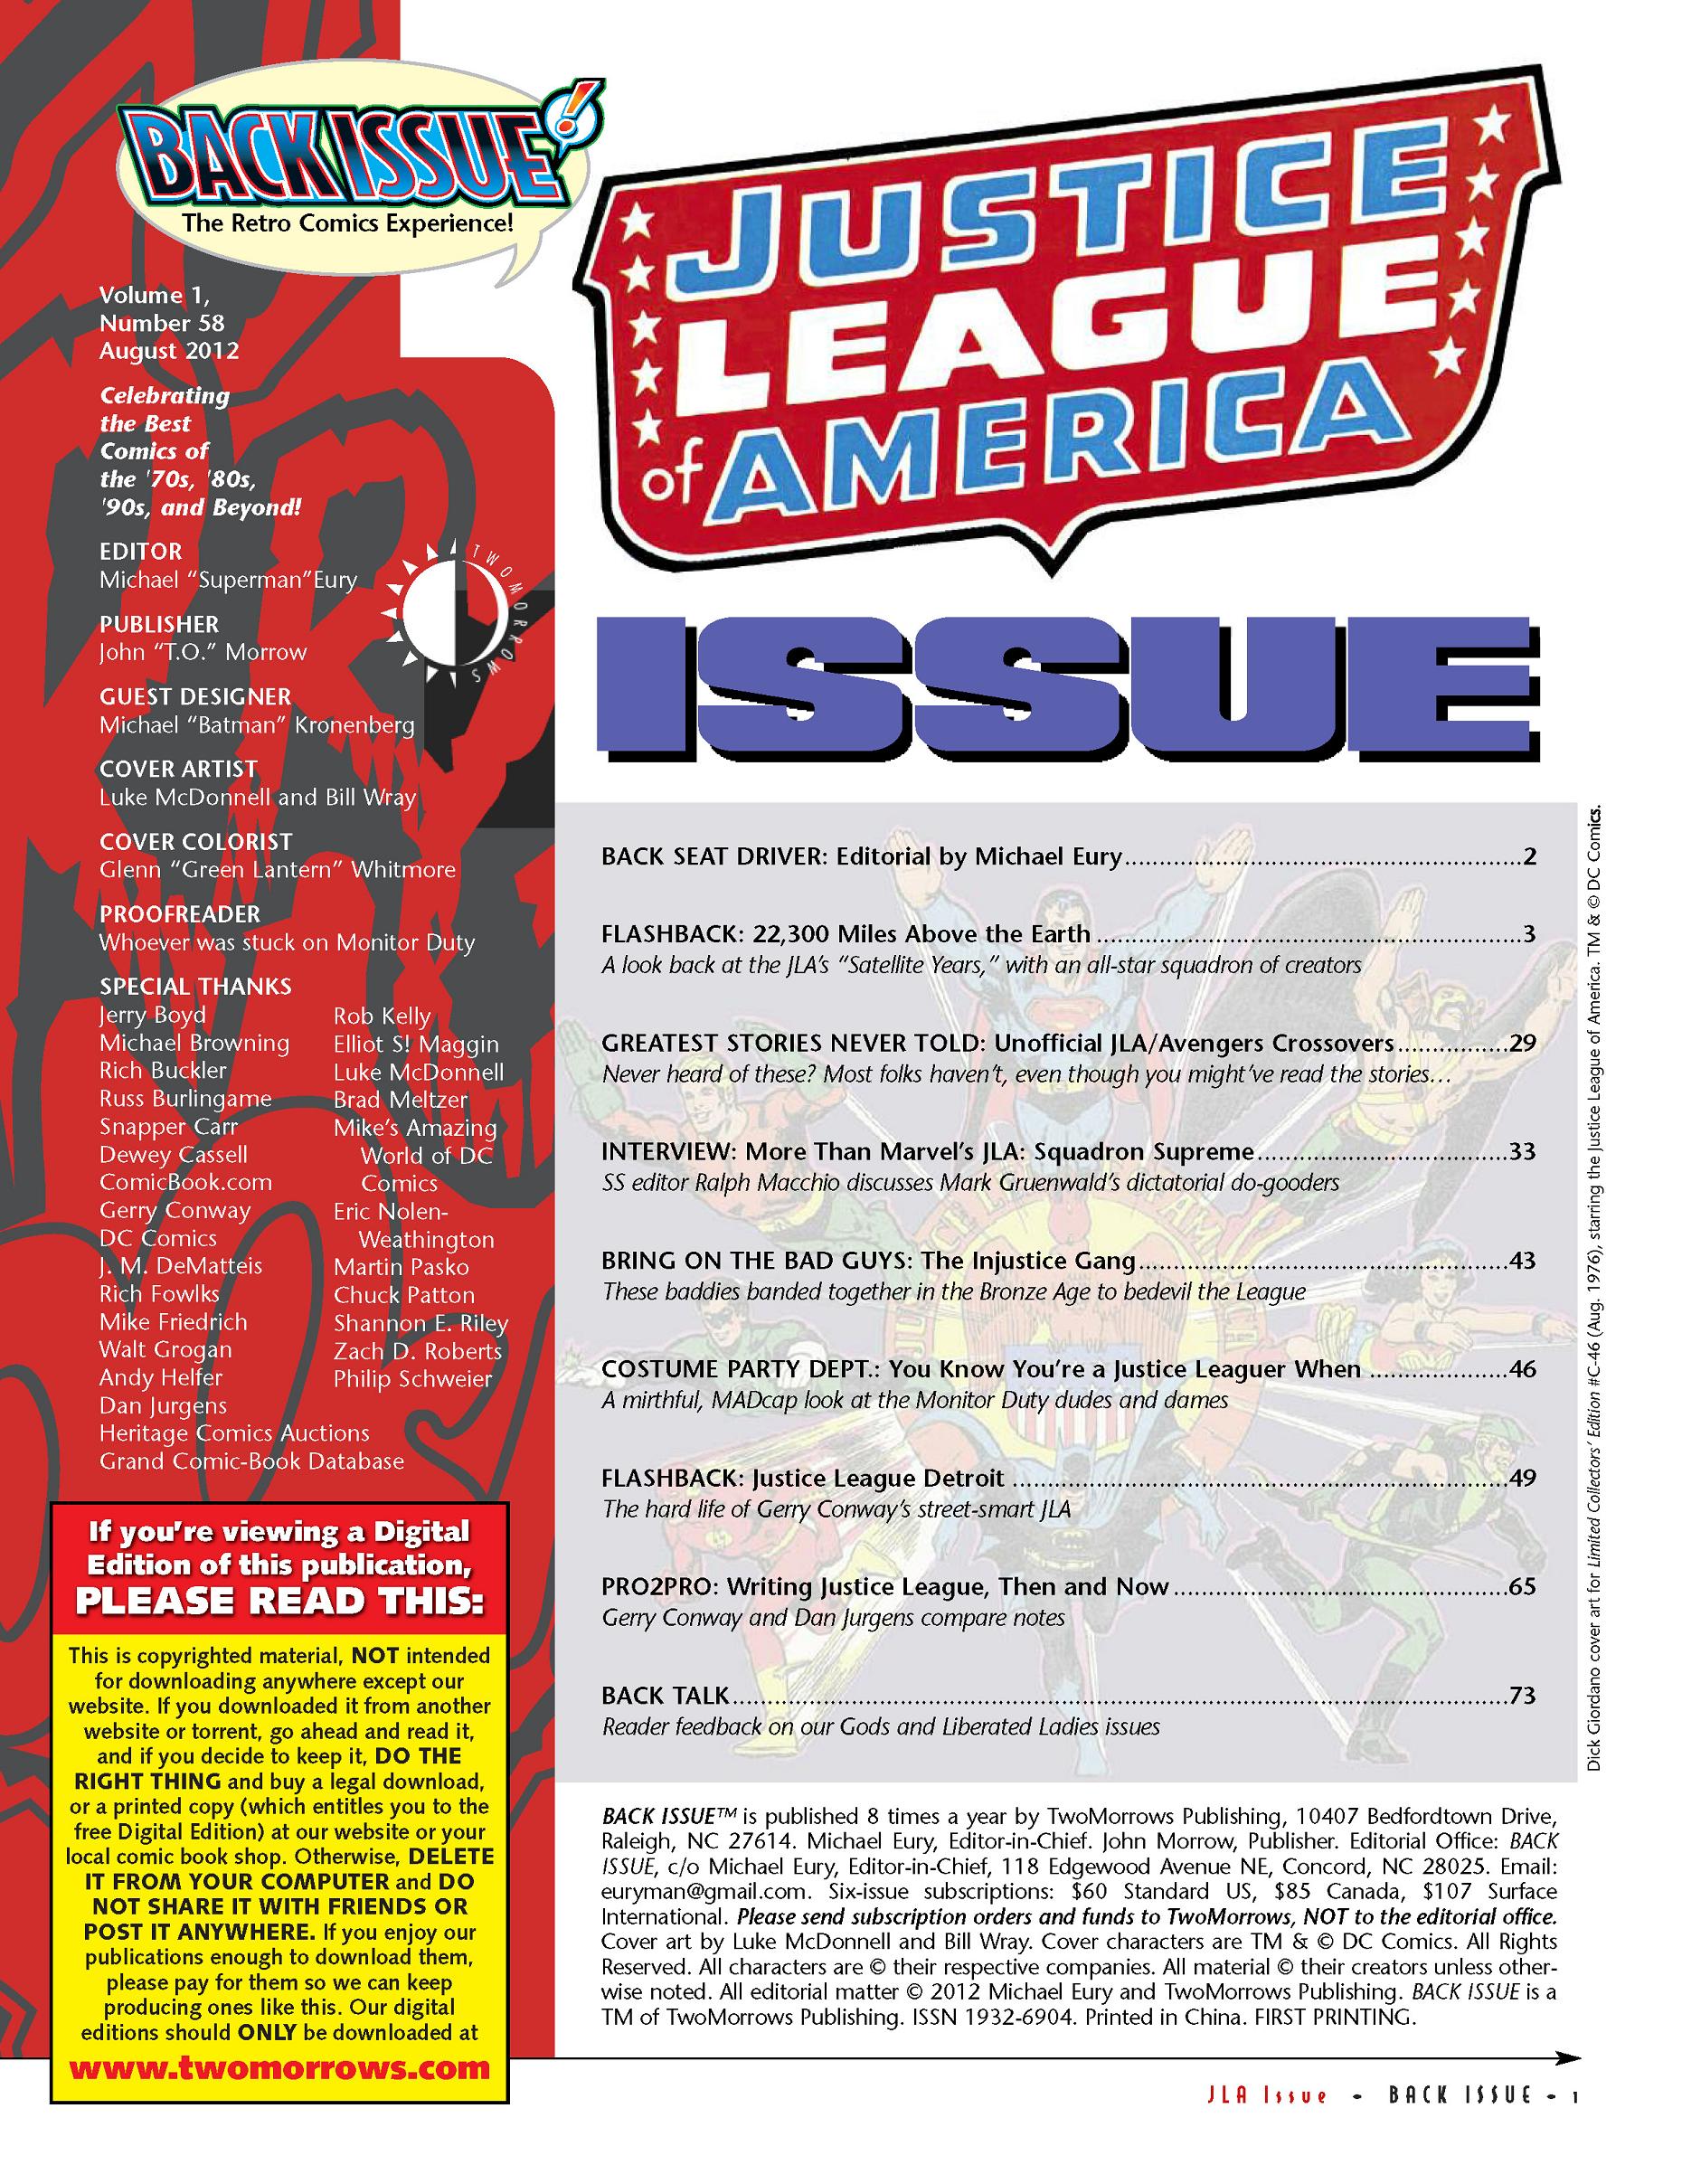 Read online Back Issue comic -  Issue #58 - 3